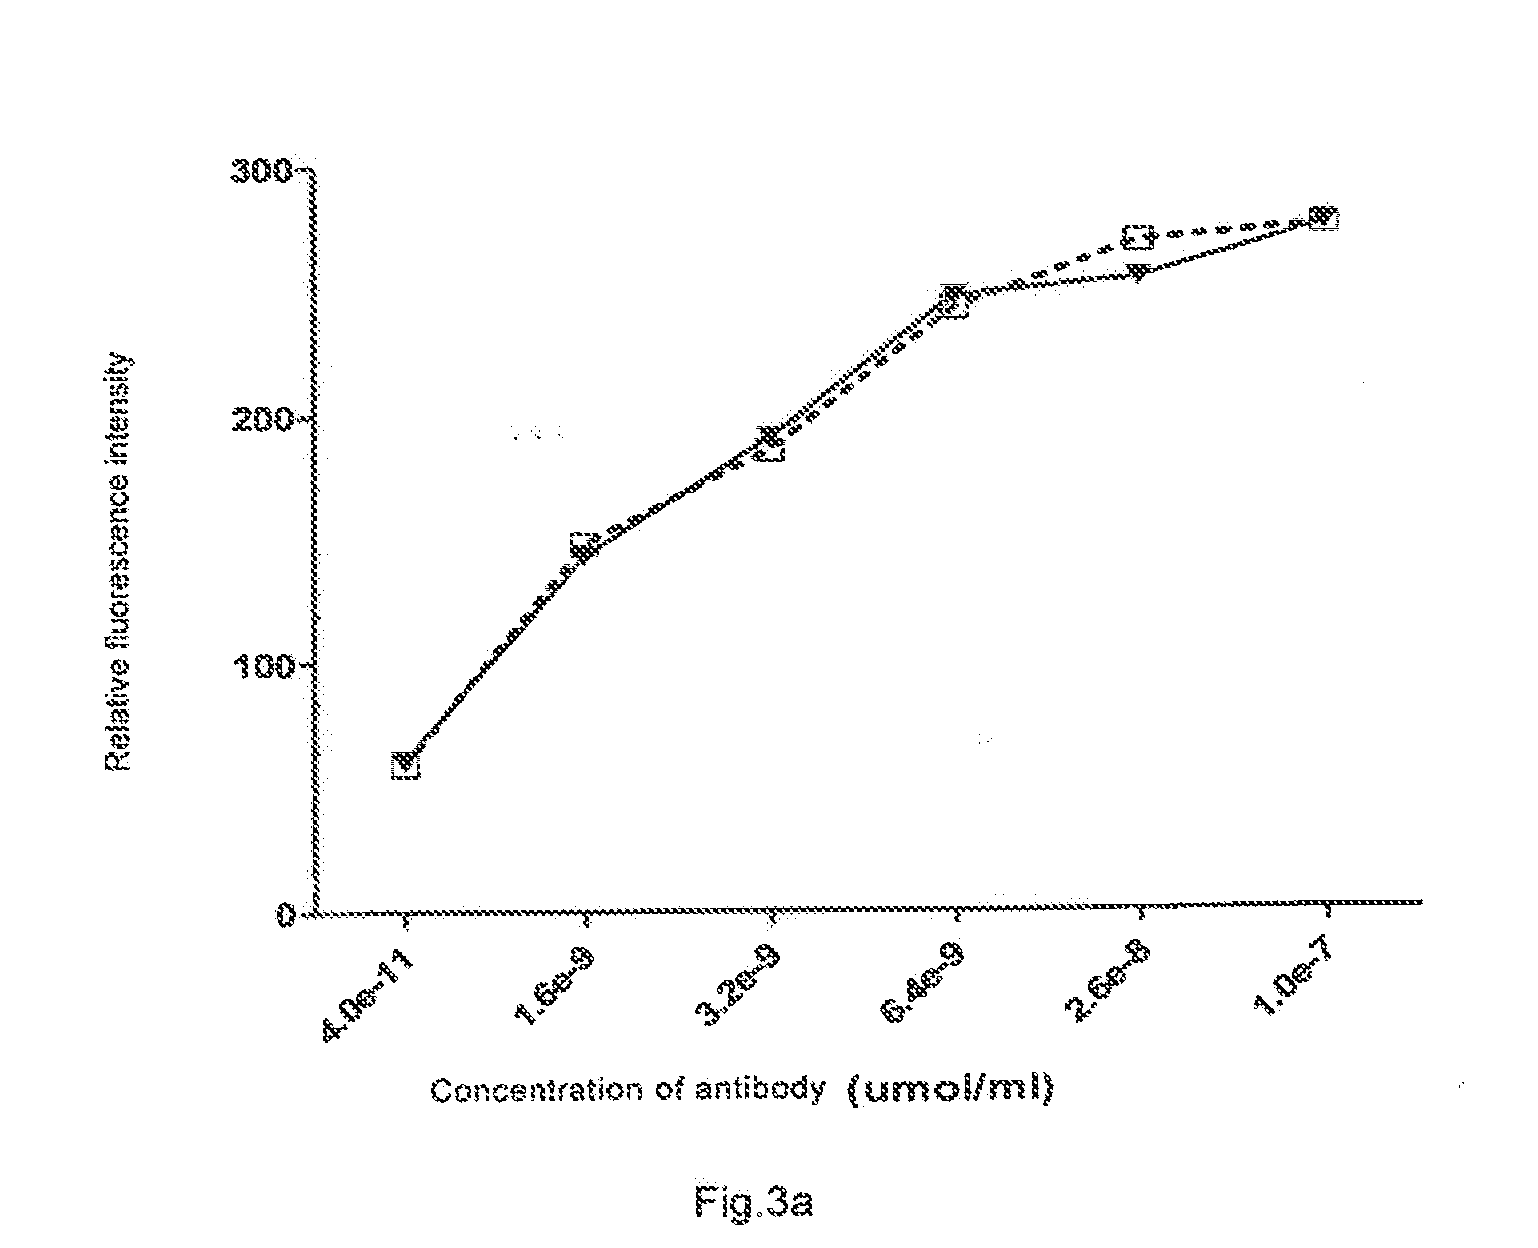  Fusion Protein of an Anti-CD20 Antibody Fab Fragment and Lidamycin, a Method for Preparing the Same, and the Use Thereof